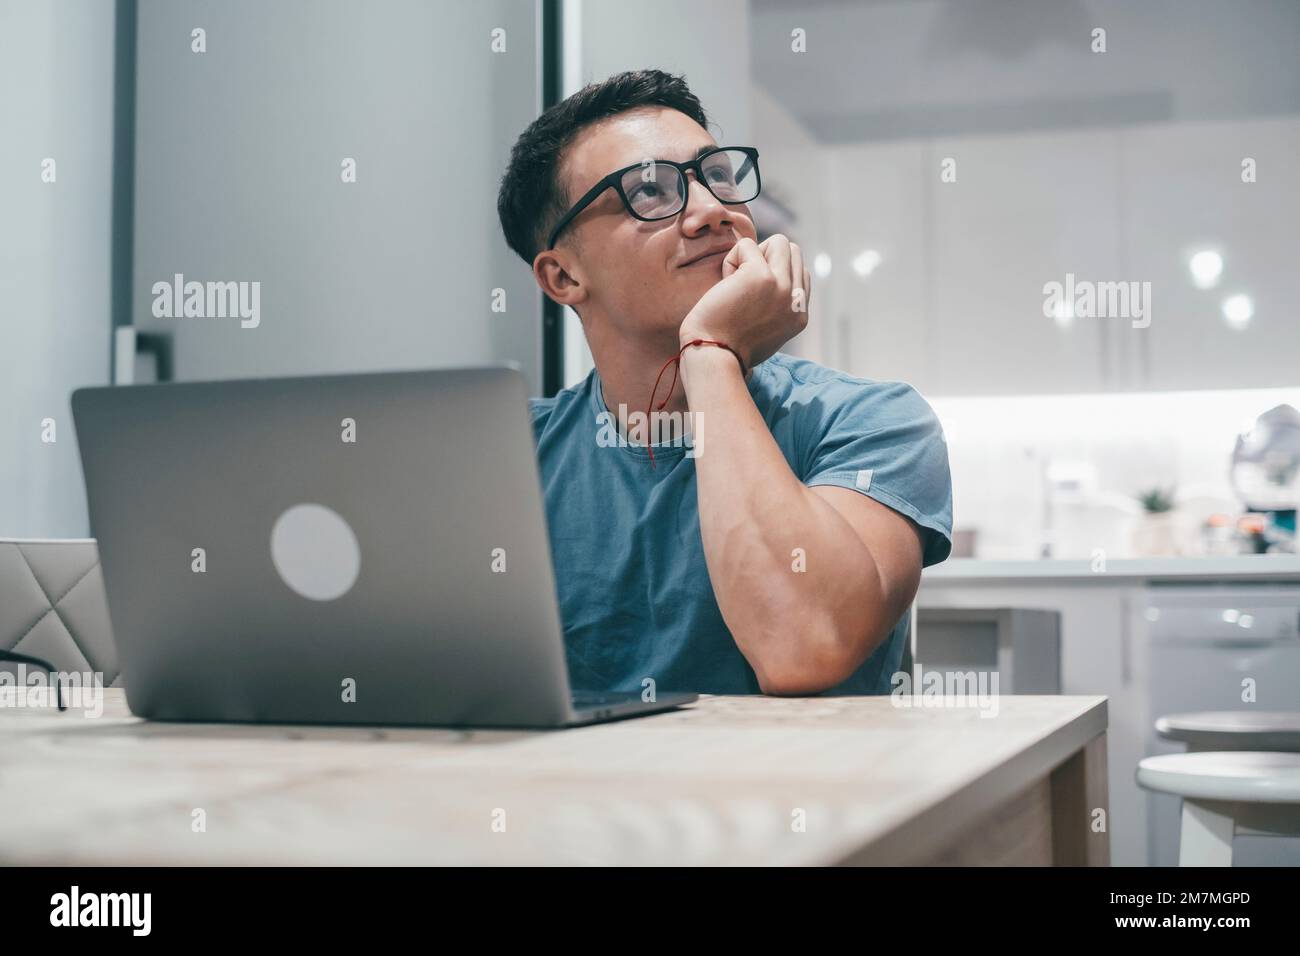 One young happy boy using computer working and having fun alone at home looking up dreaming and thinking and enjoying. Teenager man with glasses working and studying Stock Photo